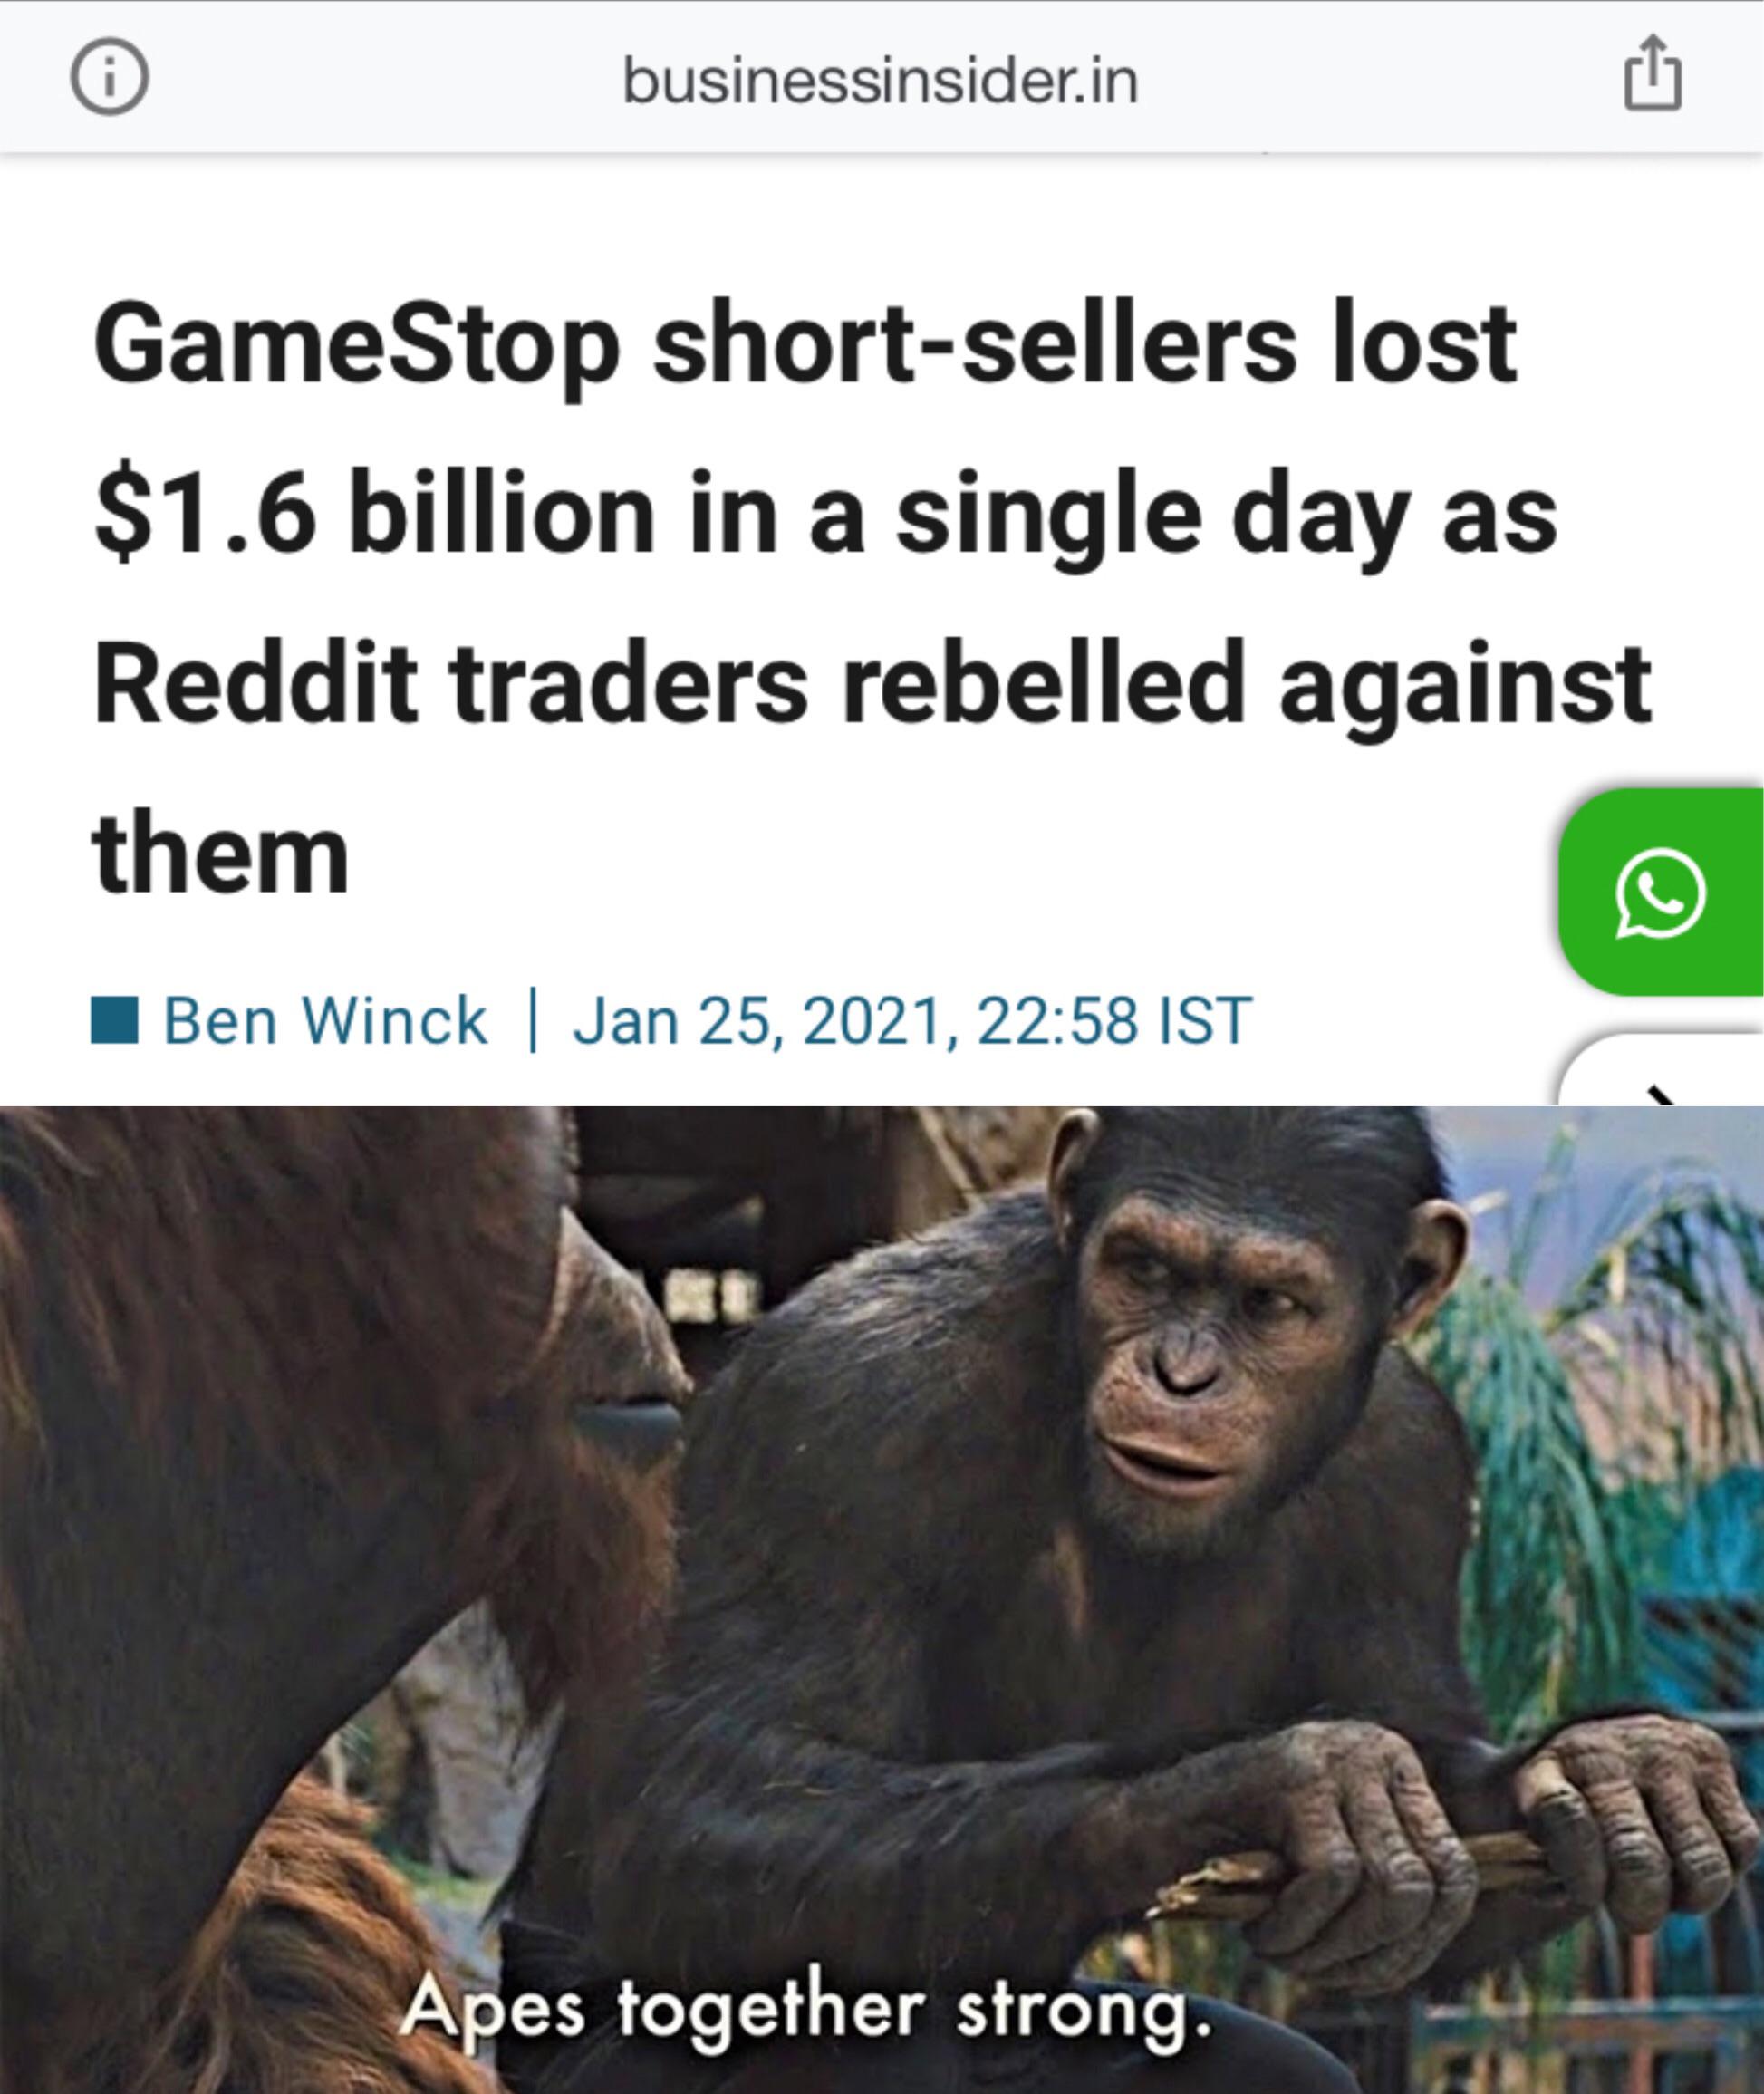 apes together strong meme - 0 businessinsider.in GameStop shortsellers lost $1.6 billion in a single day as Reddit traders rebelled against them Ben Winck | , Ist Apes together strong.